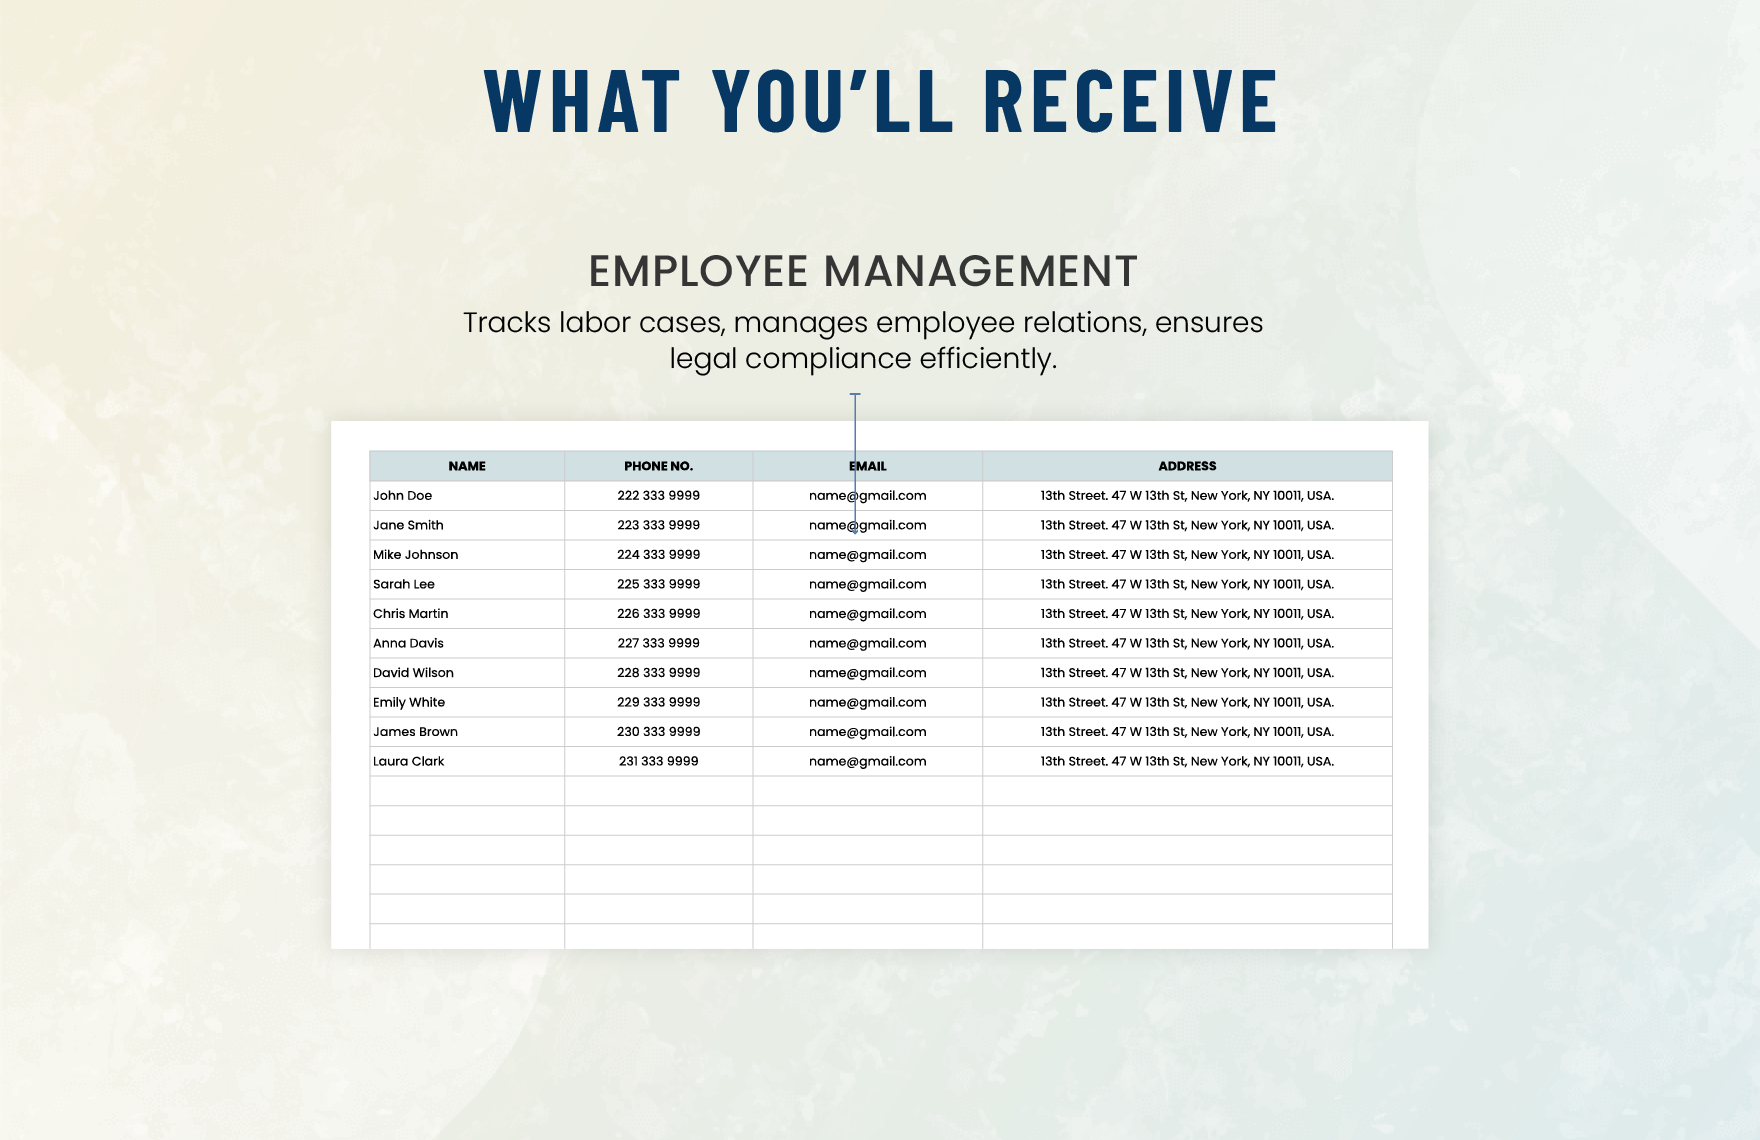 Legal Employment & Labor Labor Relations Case Tracker Template